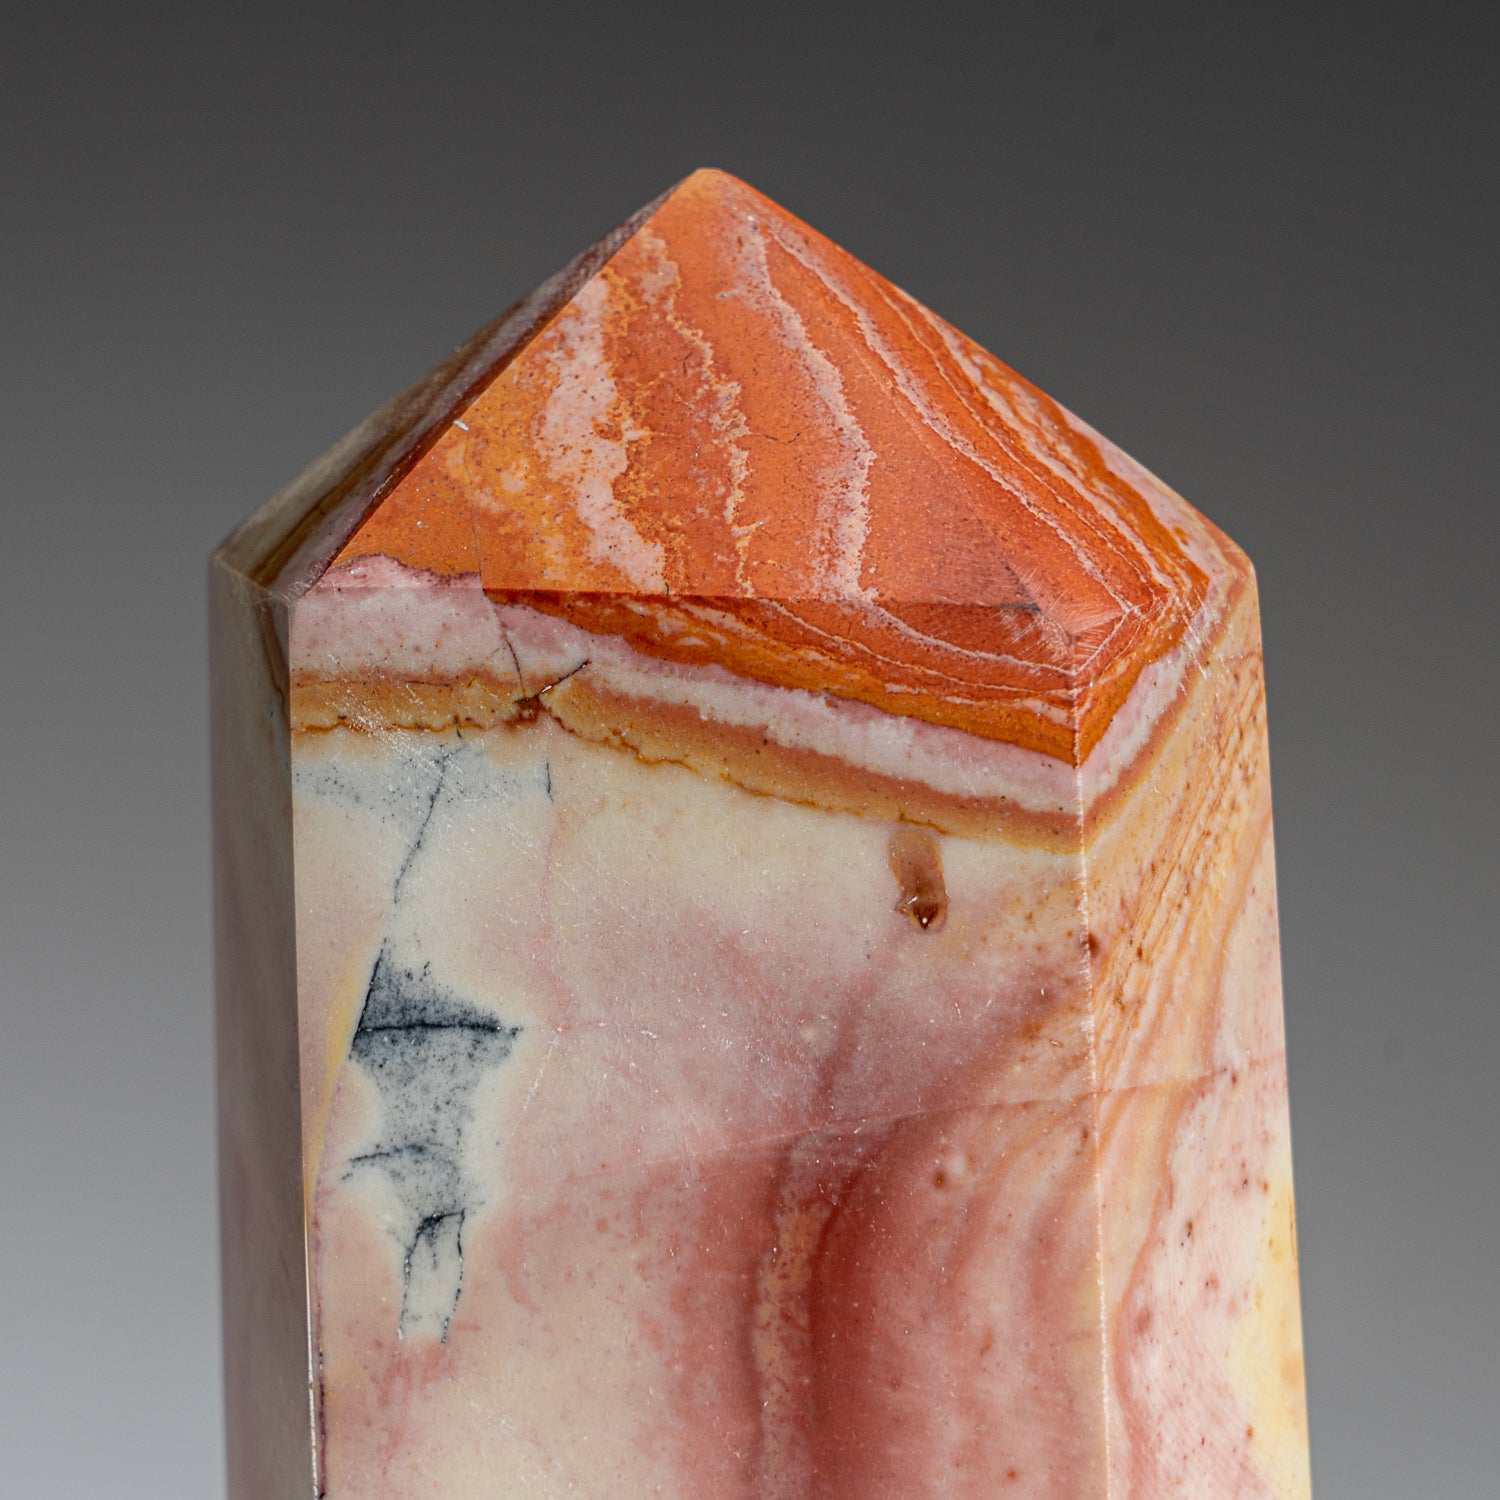 Polished Polychrome Point from Madagascar (1.4 lbs)